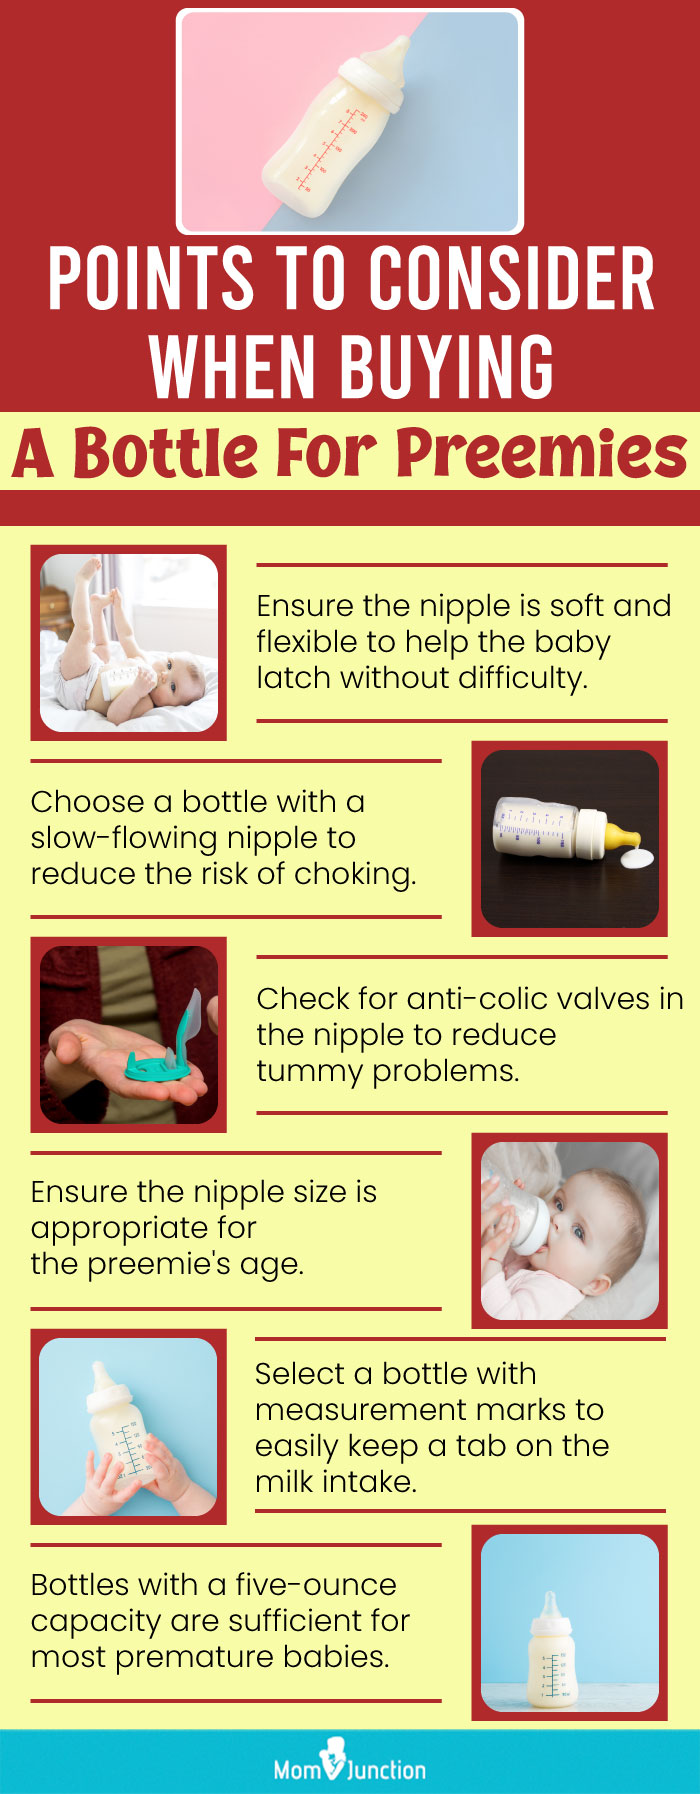 Points To Consider When Buying A Bottle For Preemies (infographic)